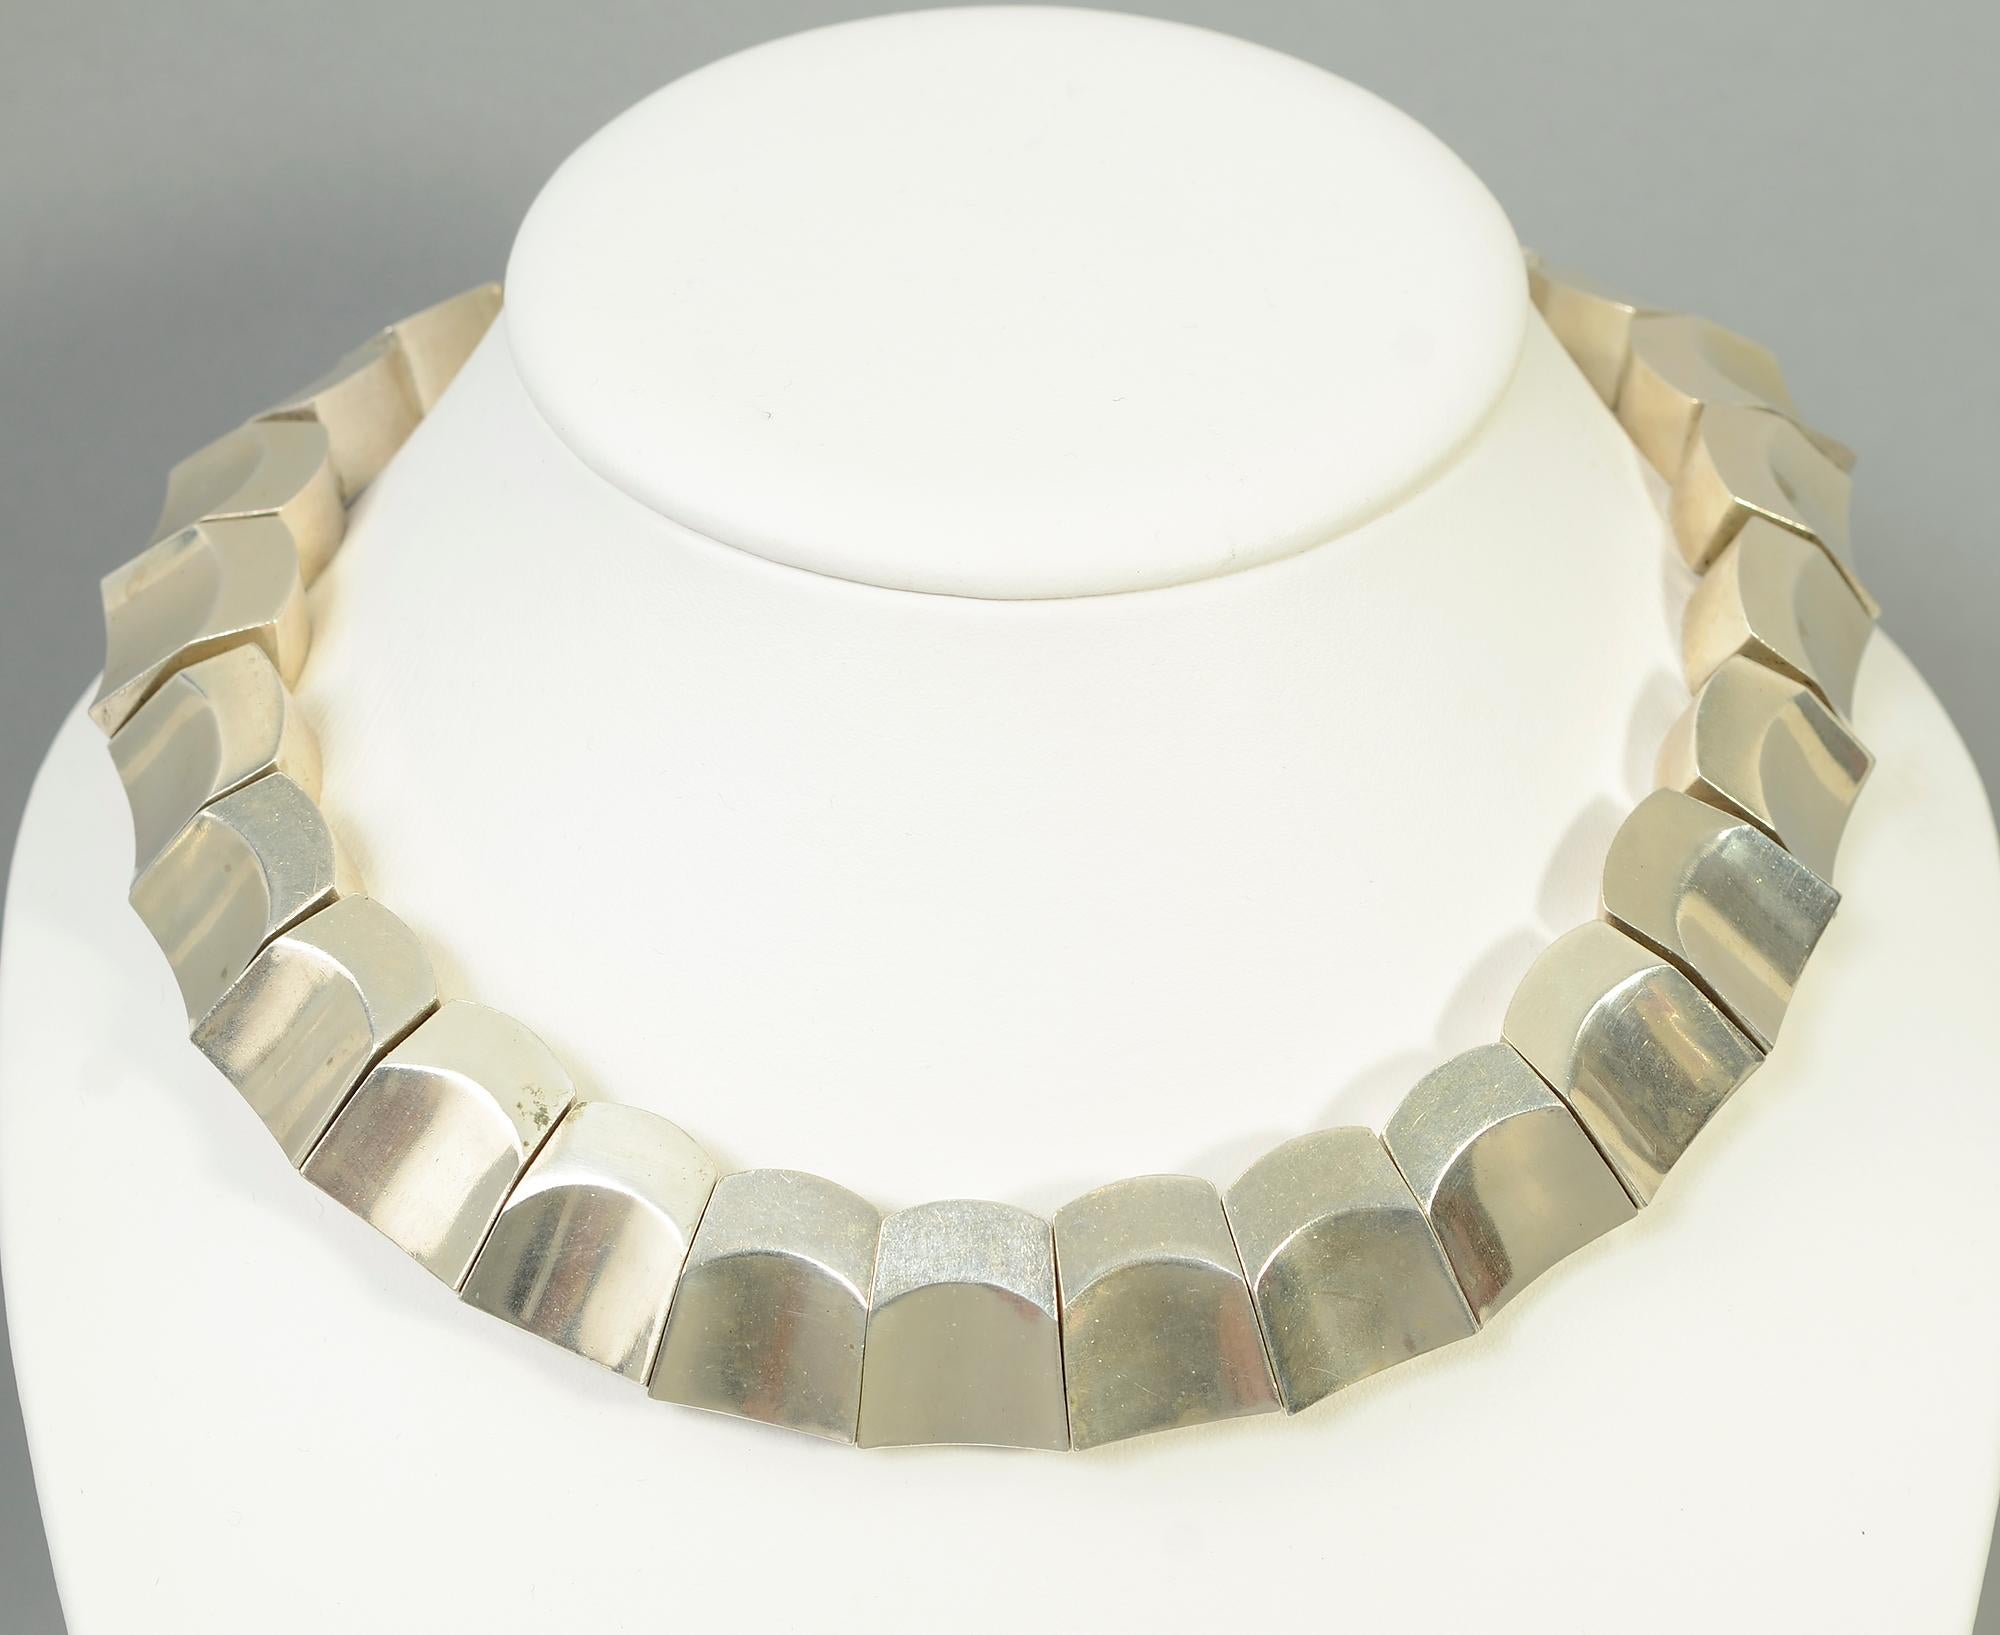 The Thumbprint design is one one Antonio Pineda's most popular bracelets. Rarely does one find the accompanying necklace.
This geometric piece is in keeping with the architectural forms often created by Antonio.
The links measure 7/8